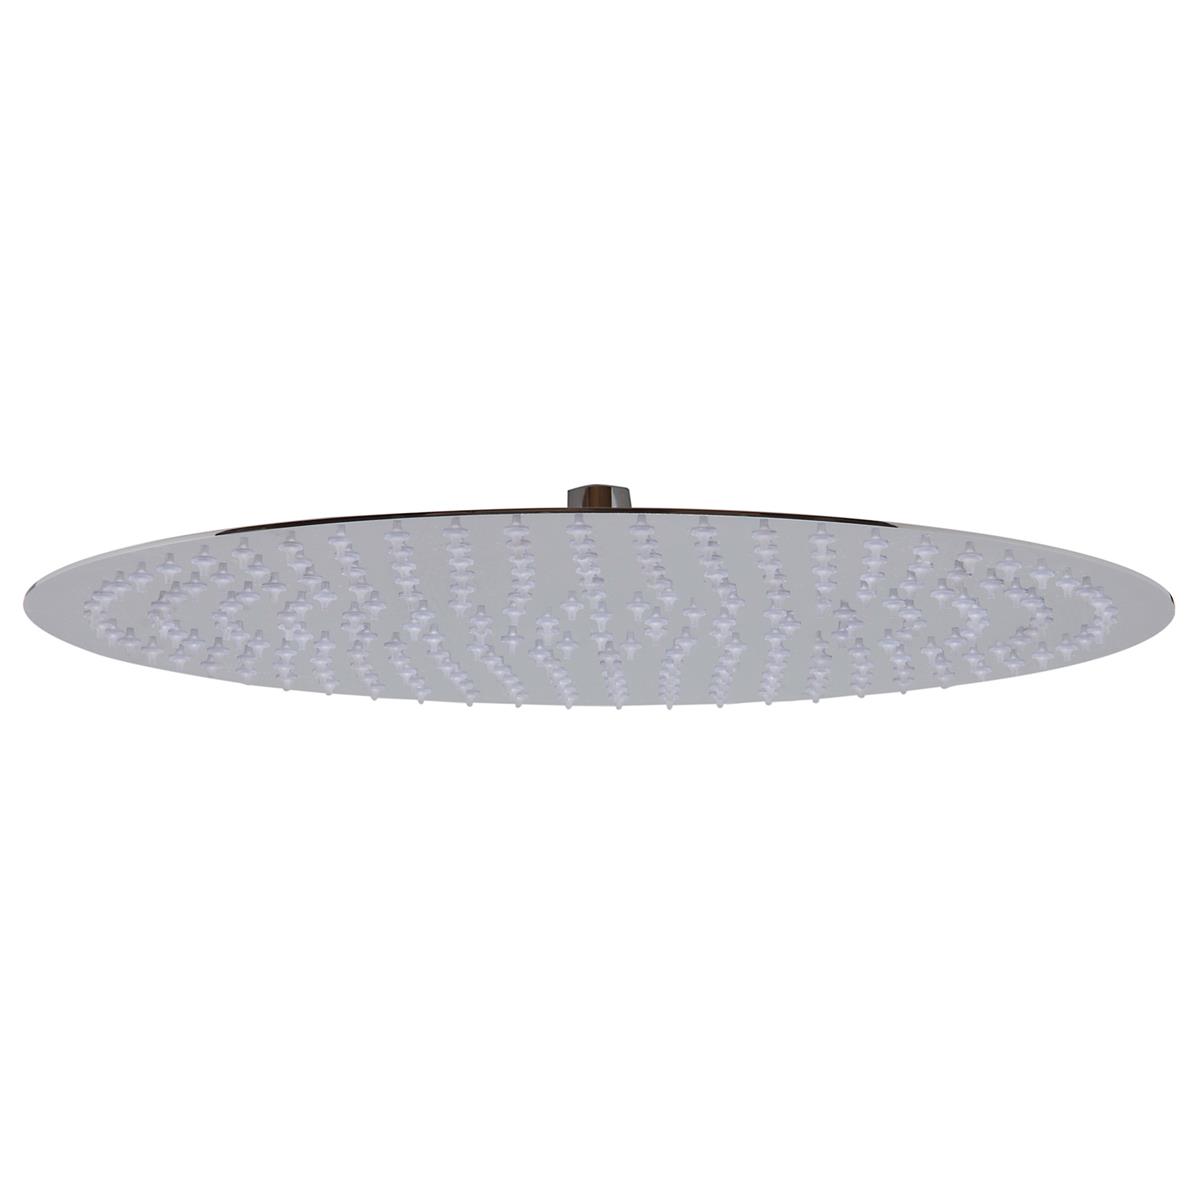 Picture of ALFI Trade RAIN16R-PSS Solid Polished Stainless Steel 16 in. Round Ultra Thin Rain Shower Head